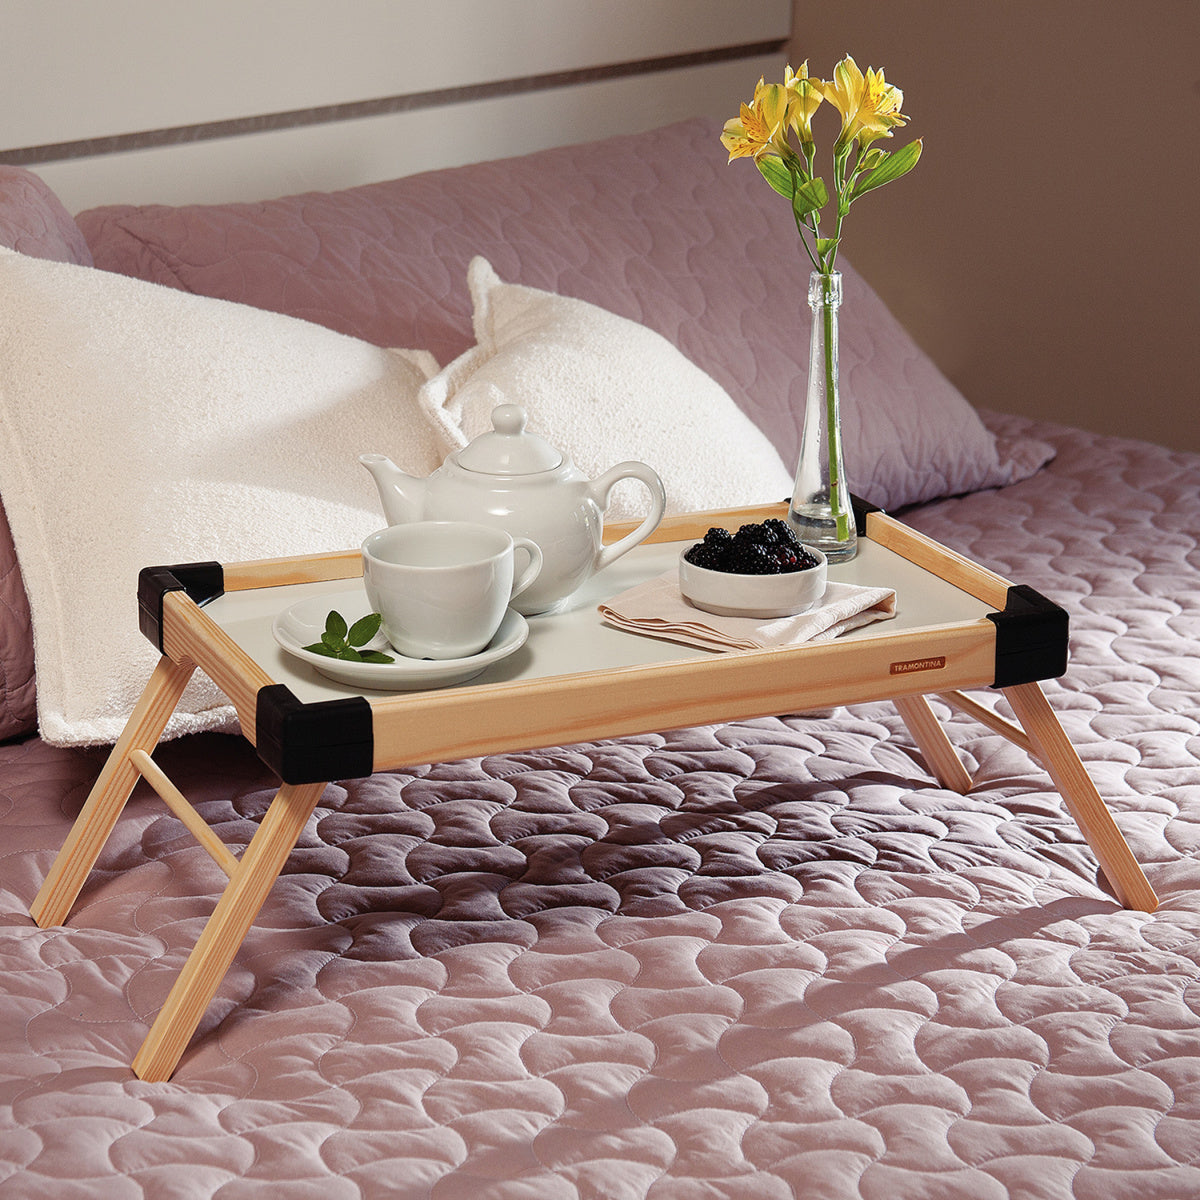 Bed Tray Table with Foldable Legs